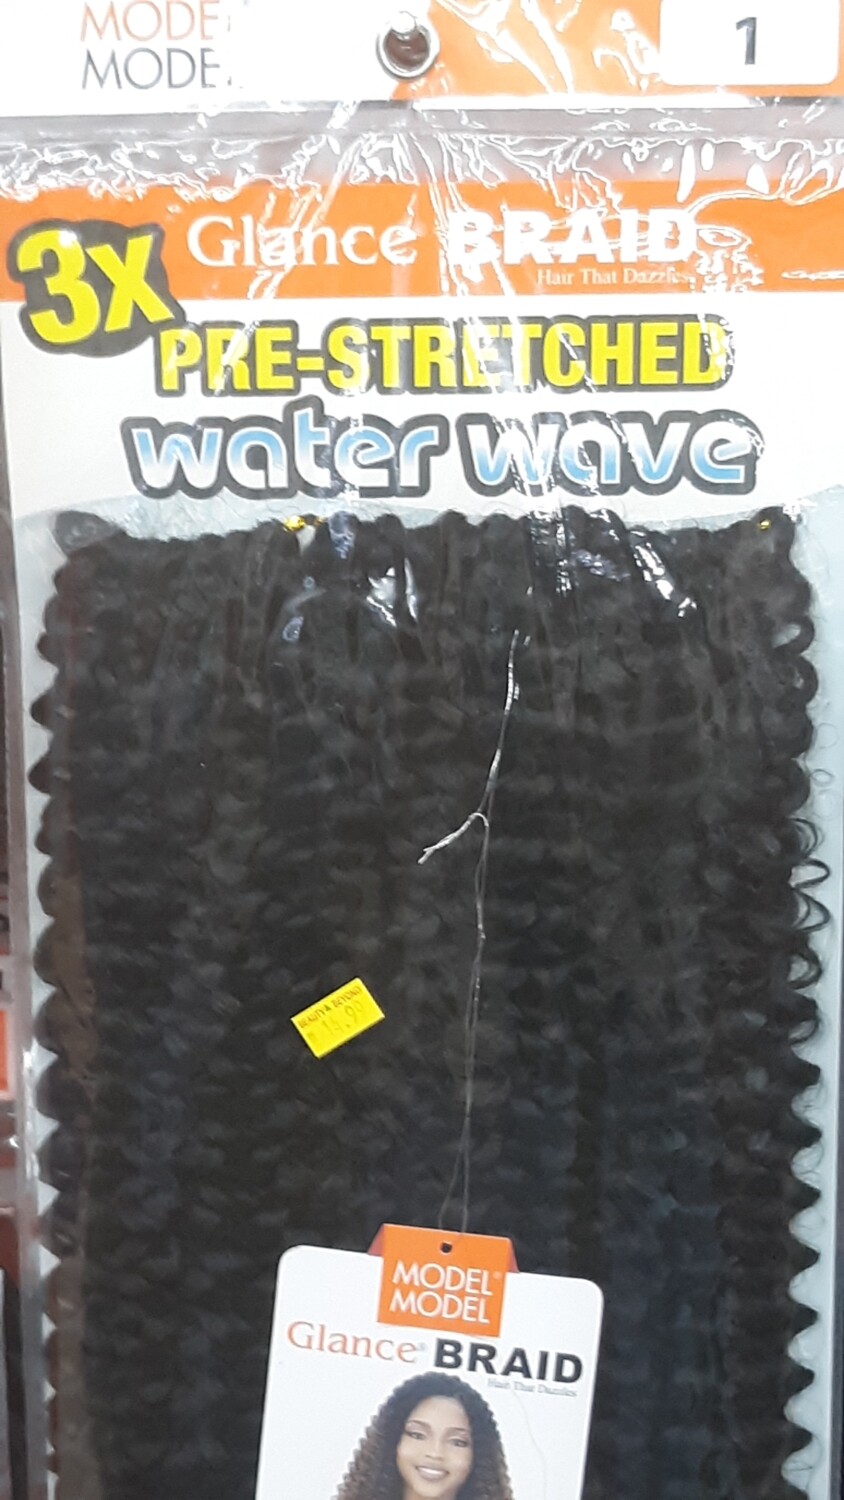 Glance Braid Pre-Stretched Water Wave 18" (1)